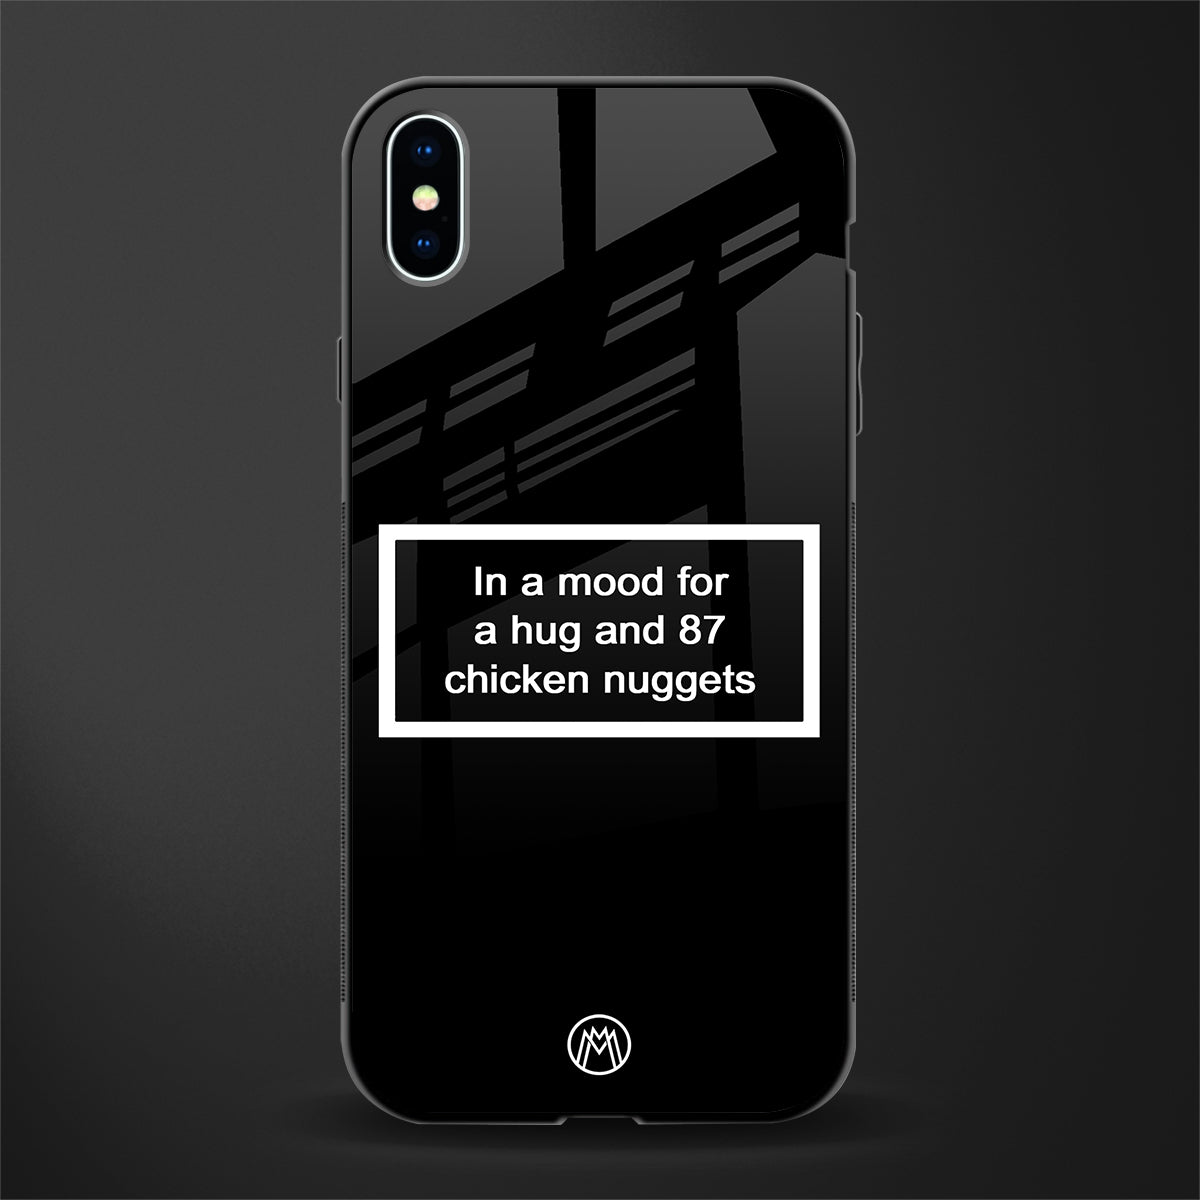 87 chicken nuggets black edition glass case for iphone xs max image